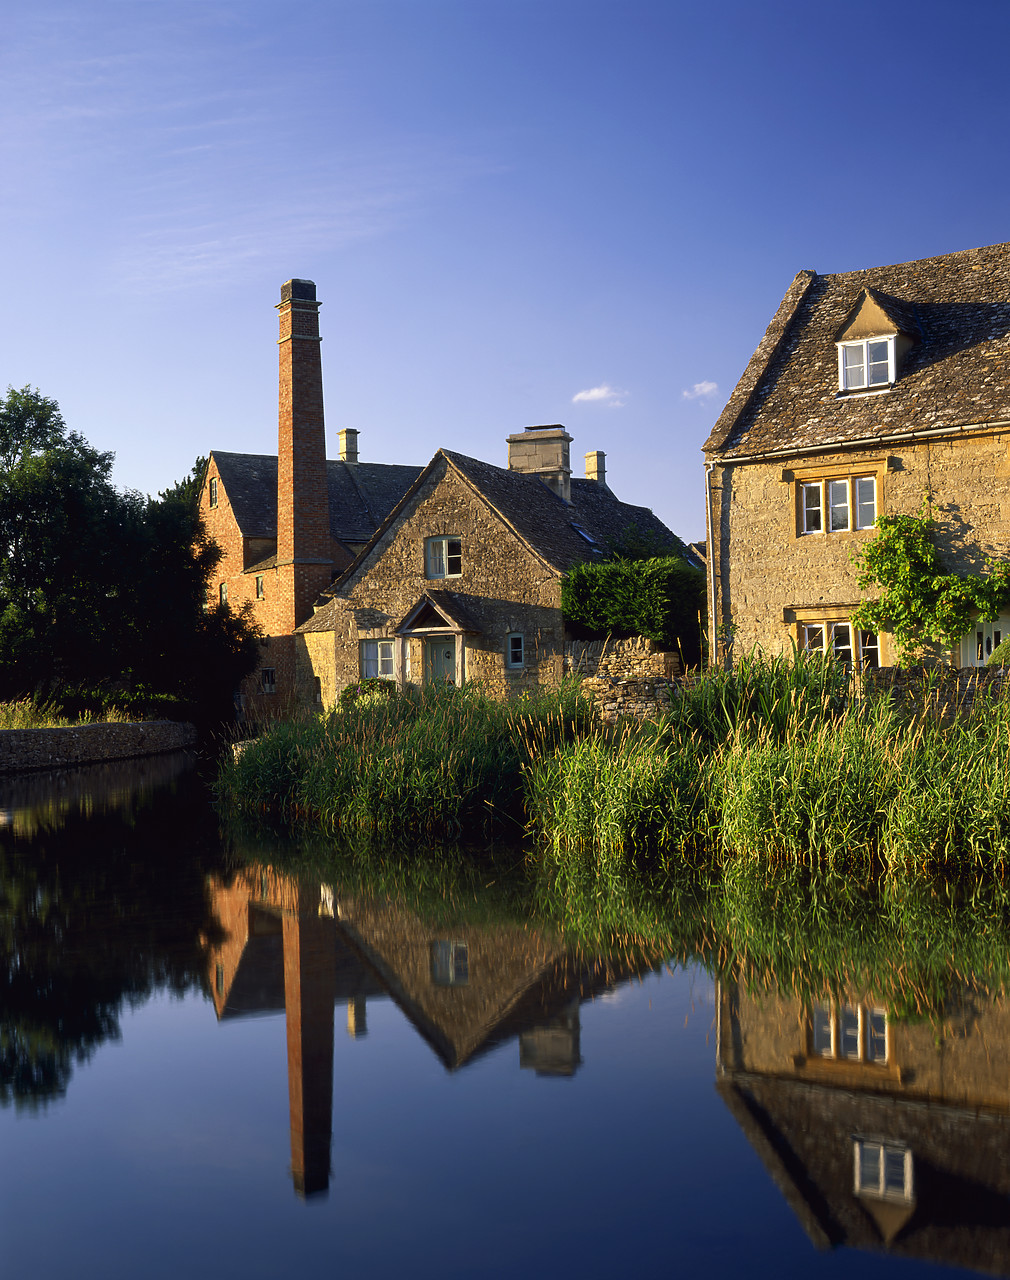 #990461-5 - Mill & Cottages, Lower Slaughter, Gloucestershire, England